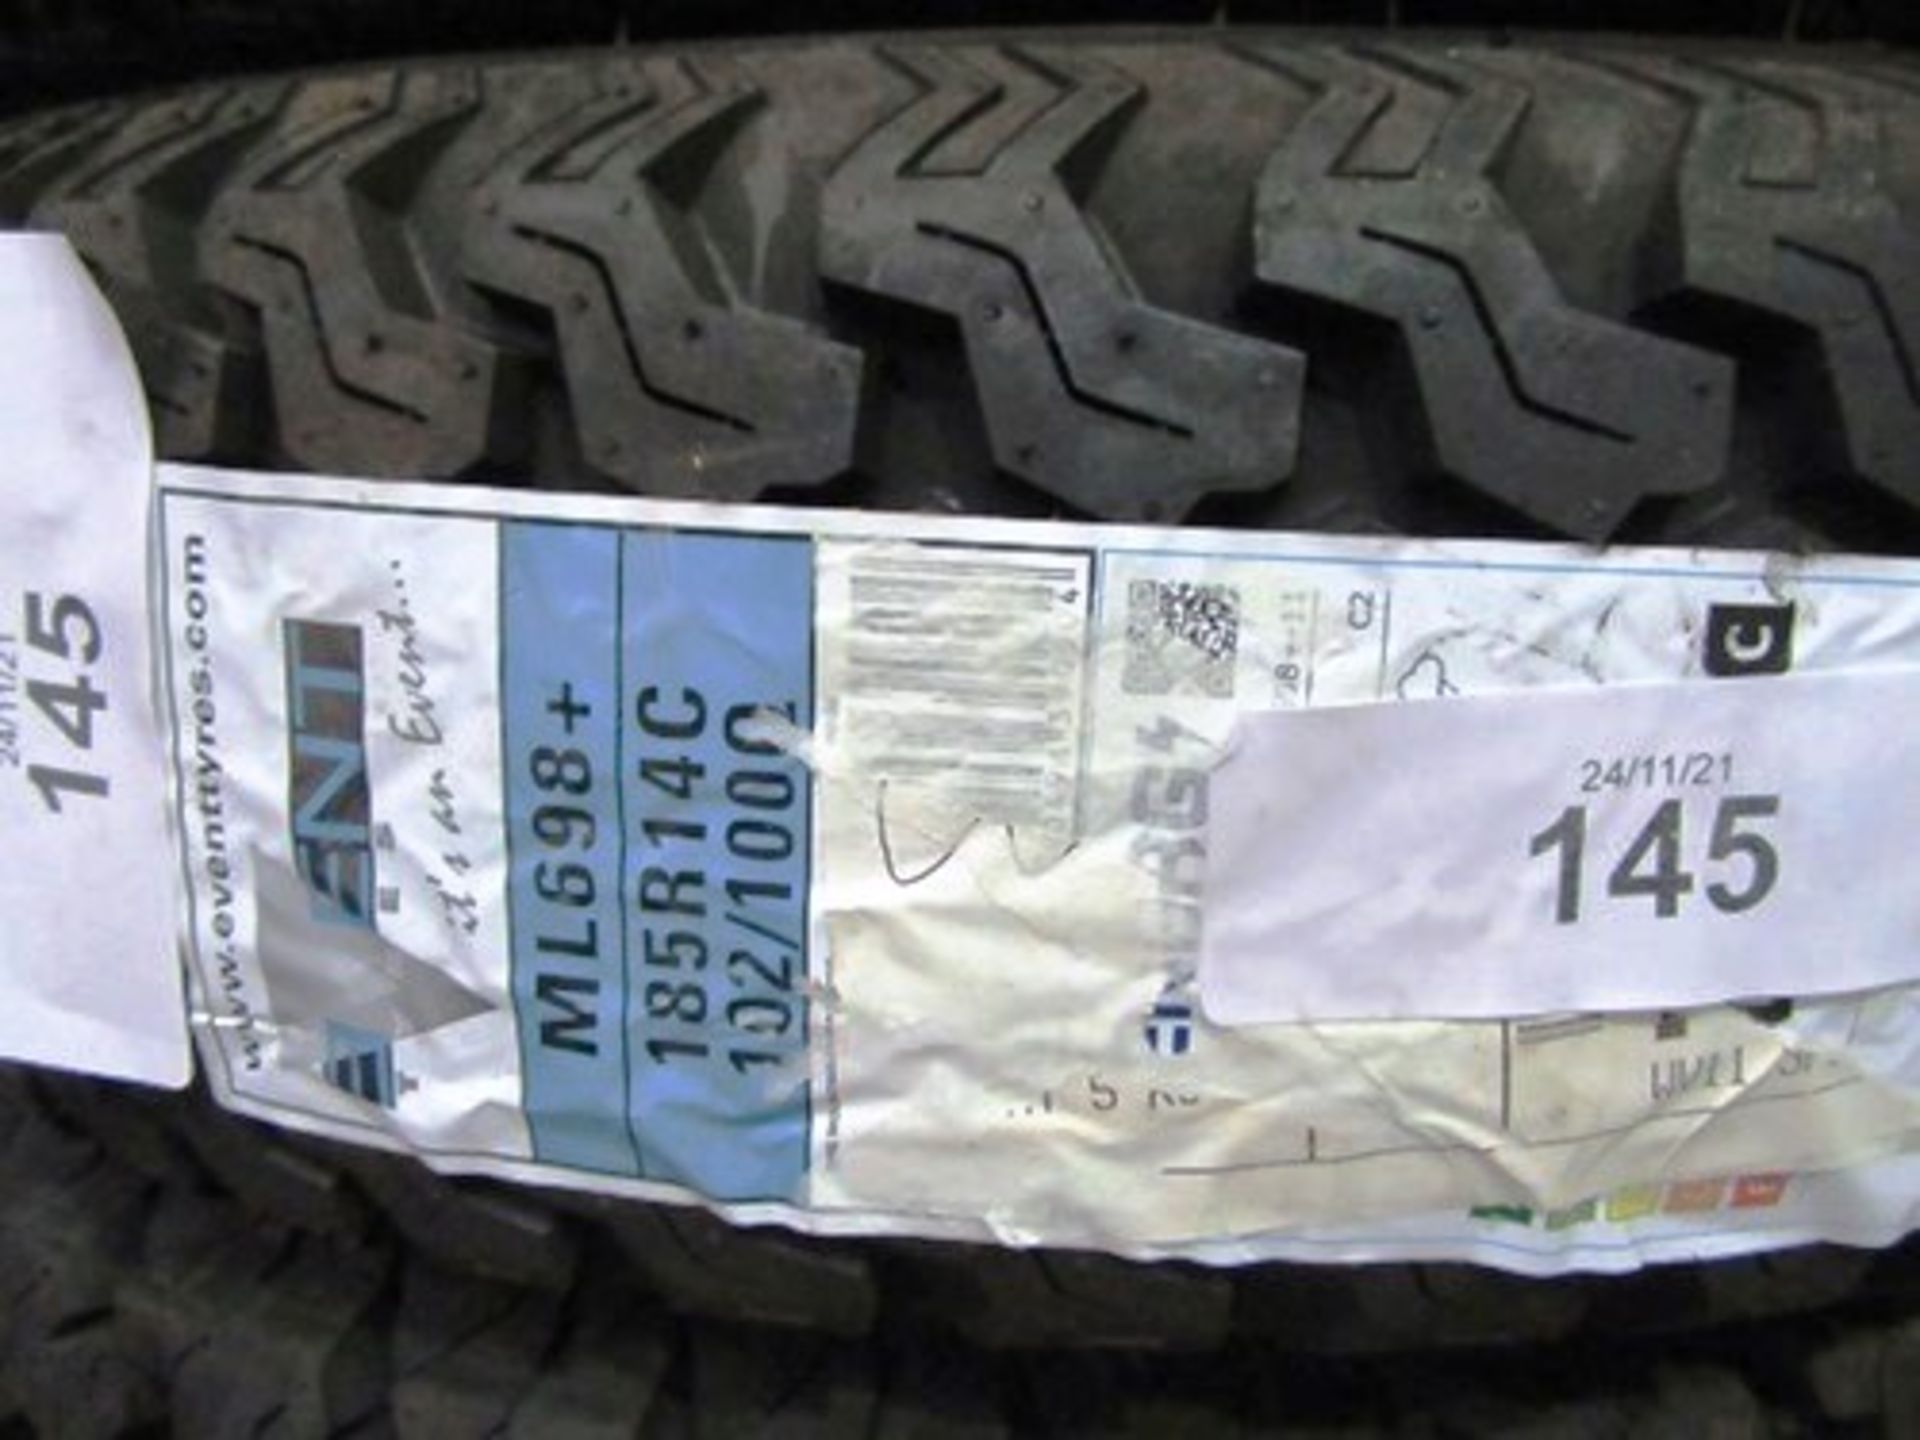 1 x Event Tyres ML698+ tyre, size 185R14C 102/100Q - New with label (GS19)